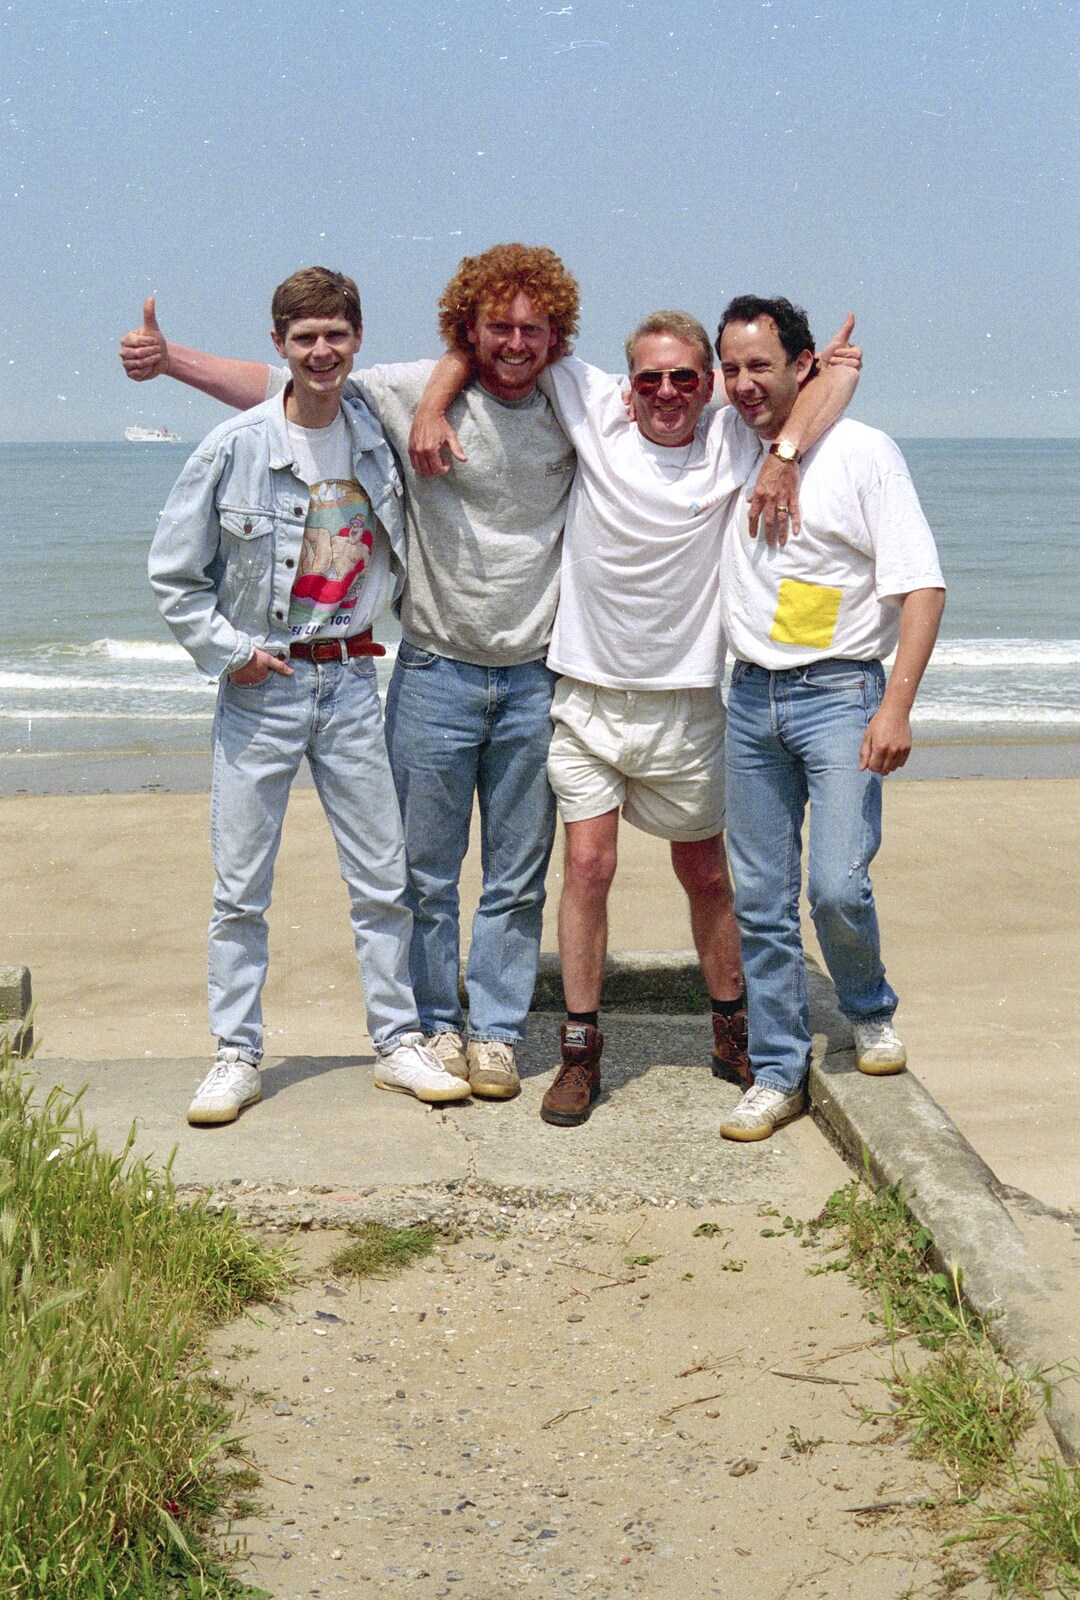 Ninja M, Wavy, John Willy and DH at Wissant from A Brome Swan Trip to Wimereux, France - 20th June 1996